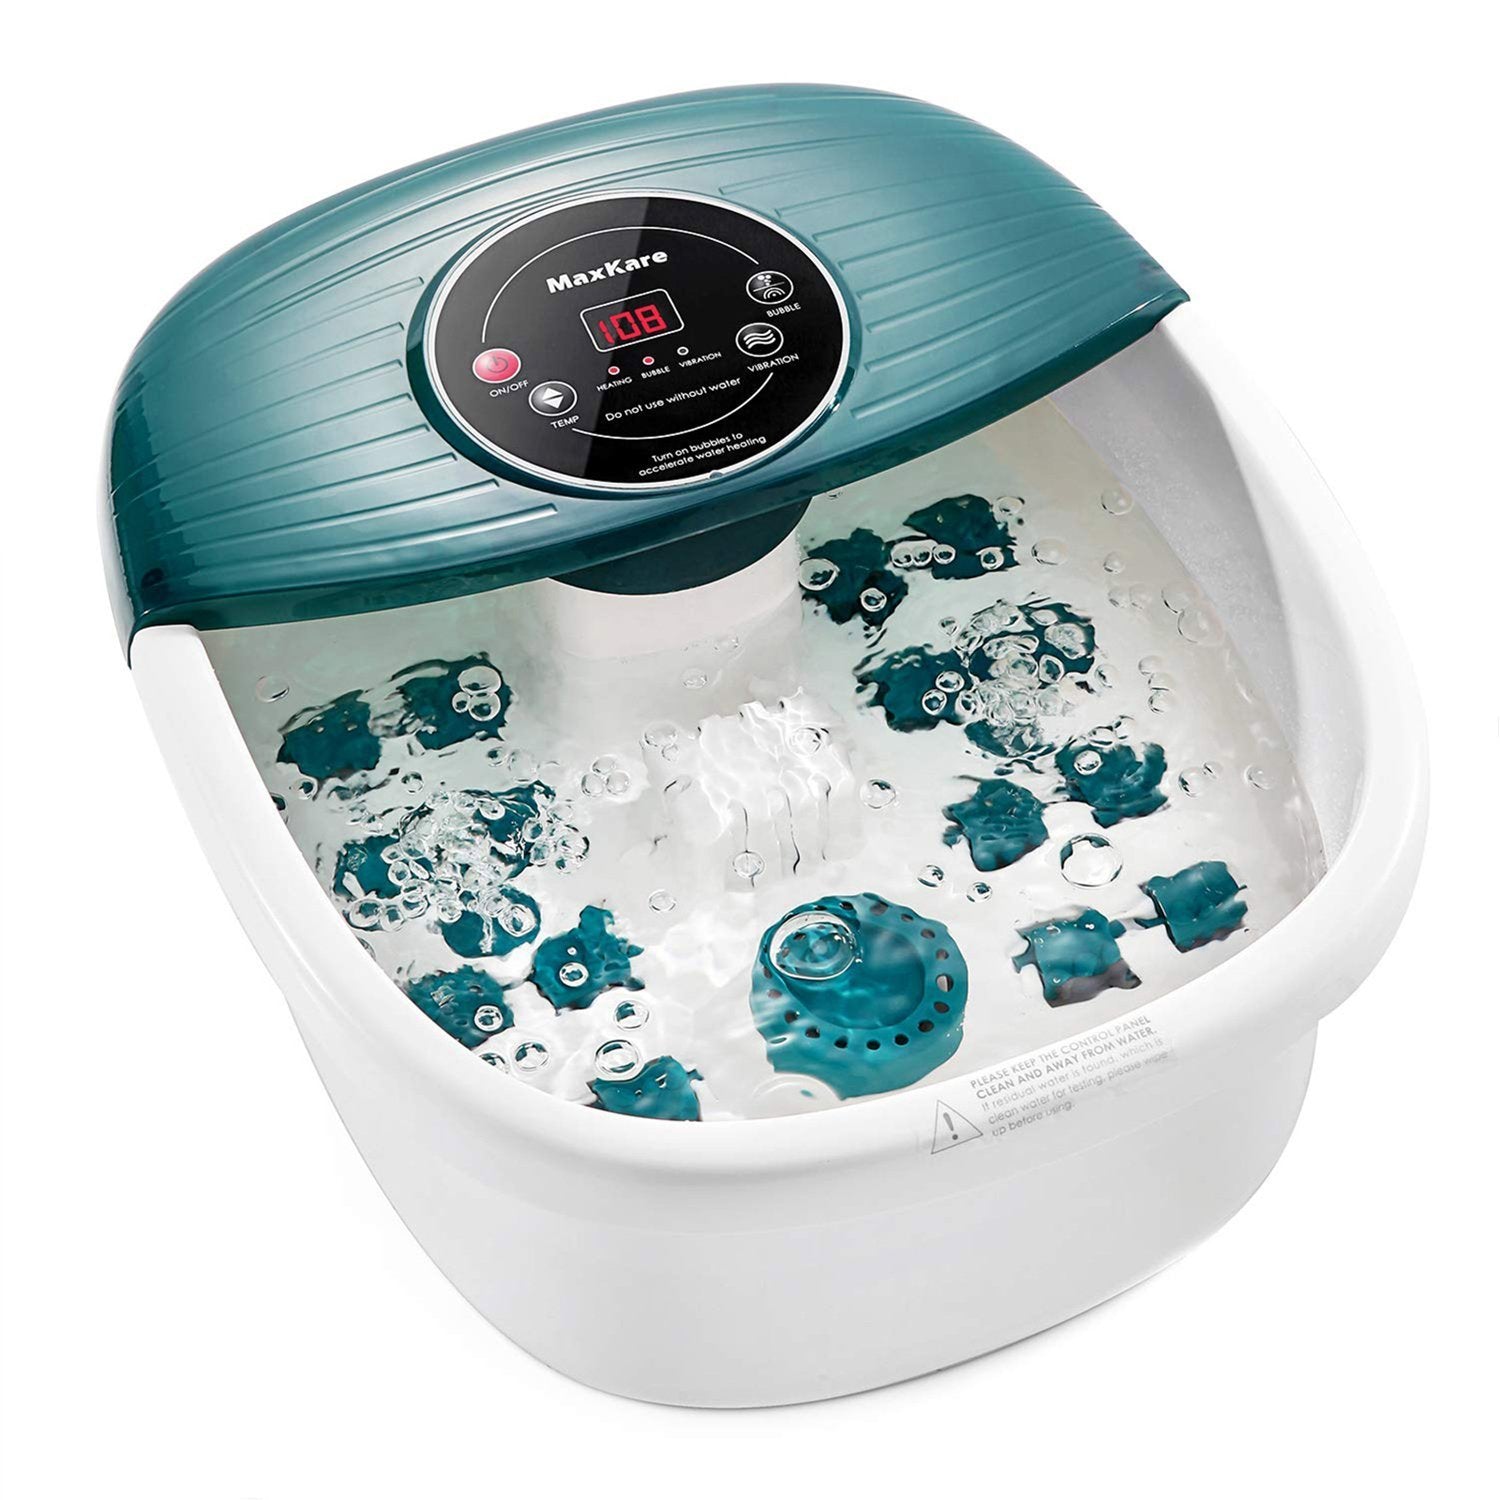 Load image into Gallery viewer, Foot Spa/Bath Massager with Heat, Bubbles, and Vibration, Digital Temperature Control, 16 Masssage Rollers with Mini Detachable Massage Points, Soothe and Comfort Feet - NAIPO
